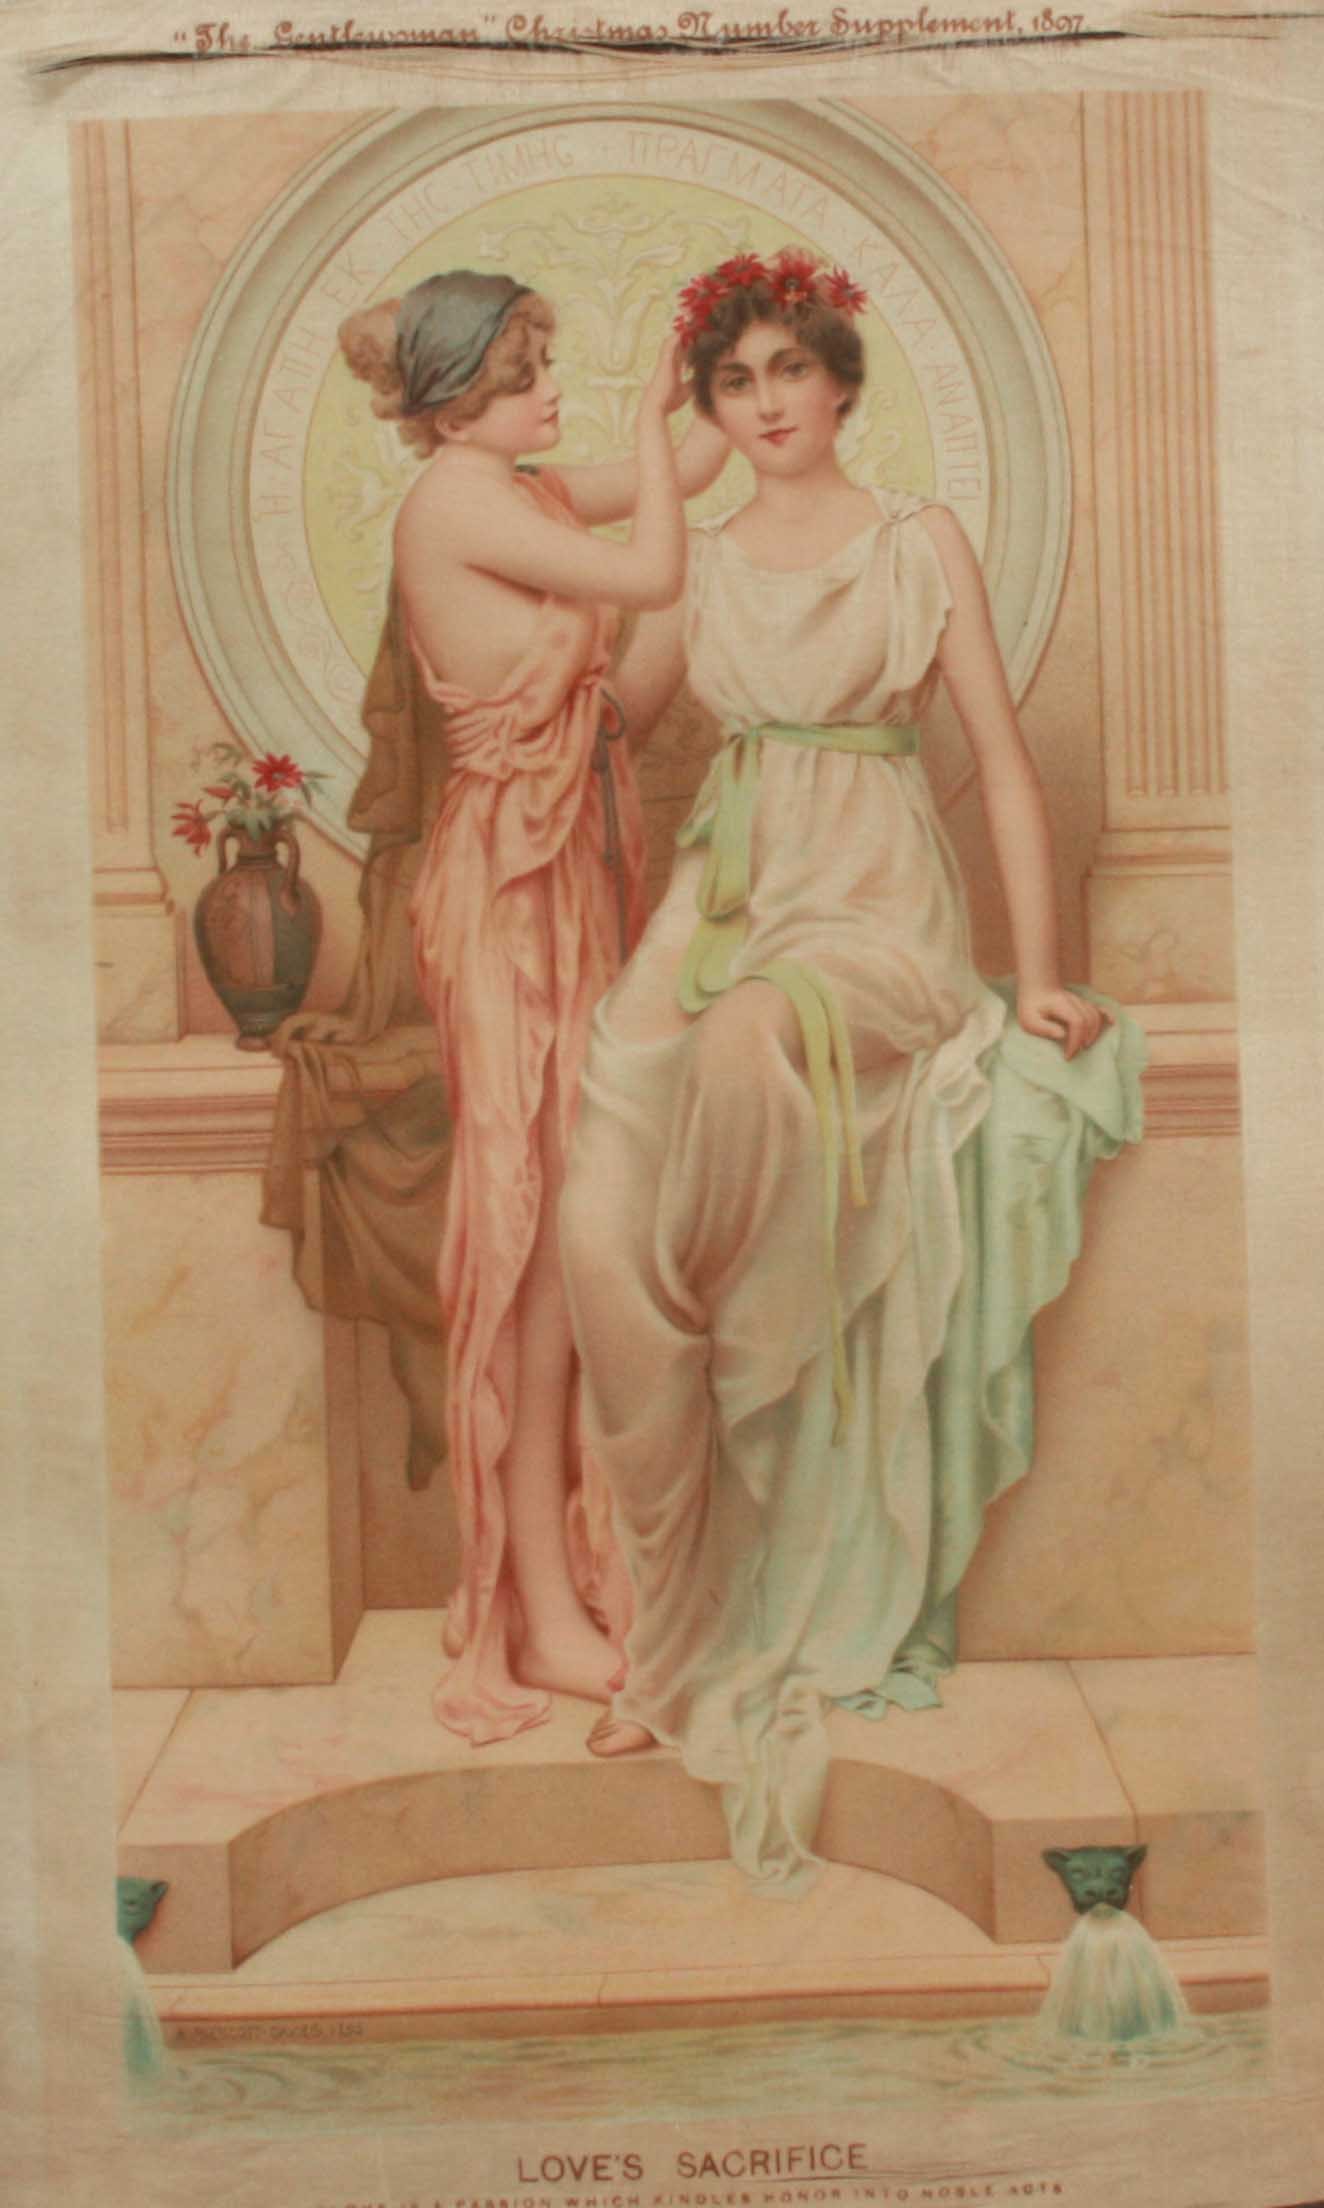 Trade silk, The Gentlewoman, `Loves Sacrifice` colour image on satin, issued with Christmas